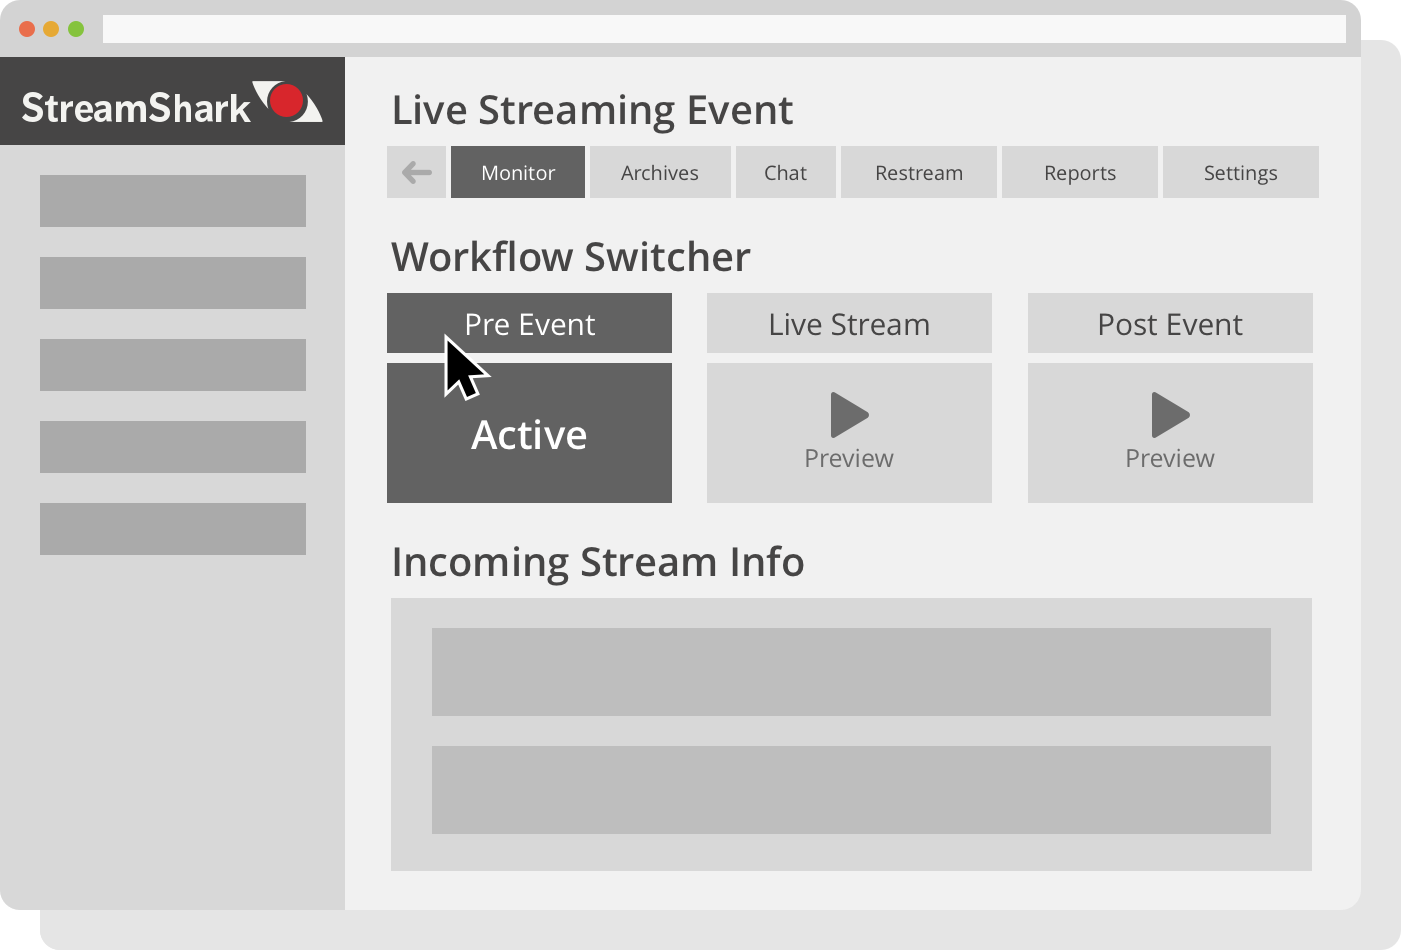 Live Streaming Workflow